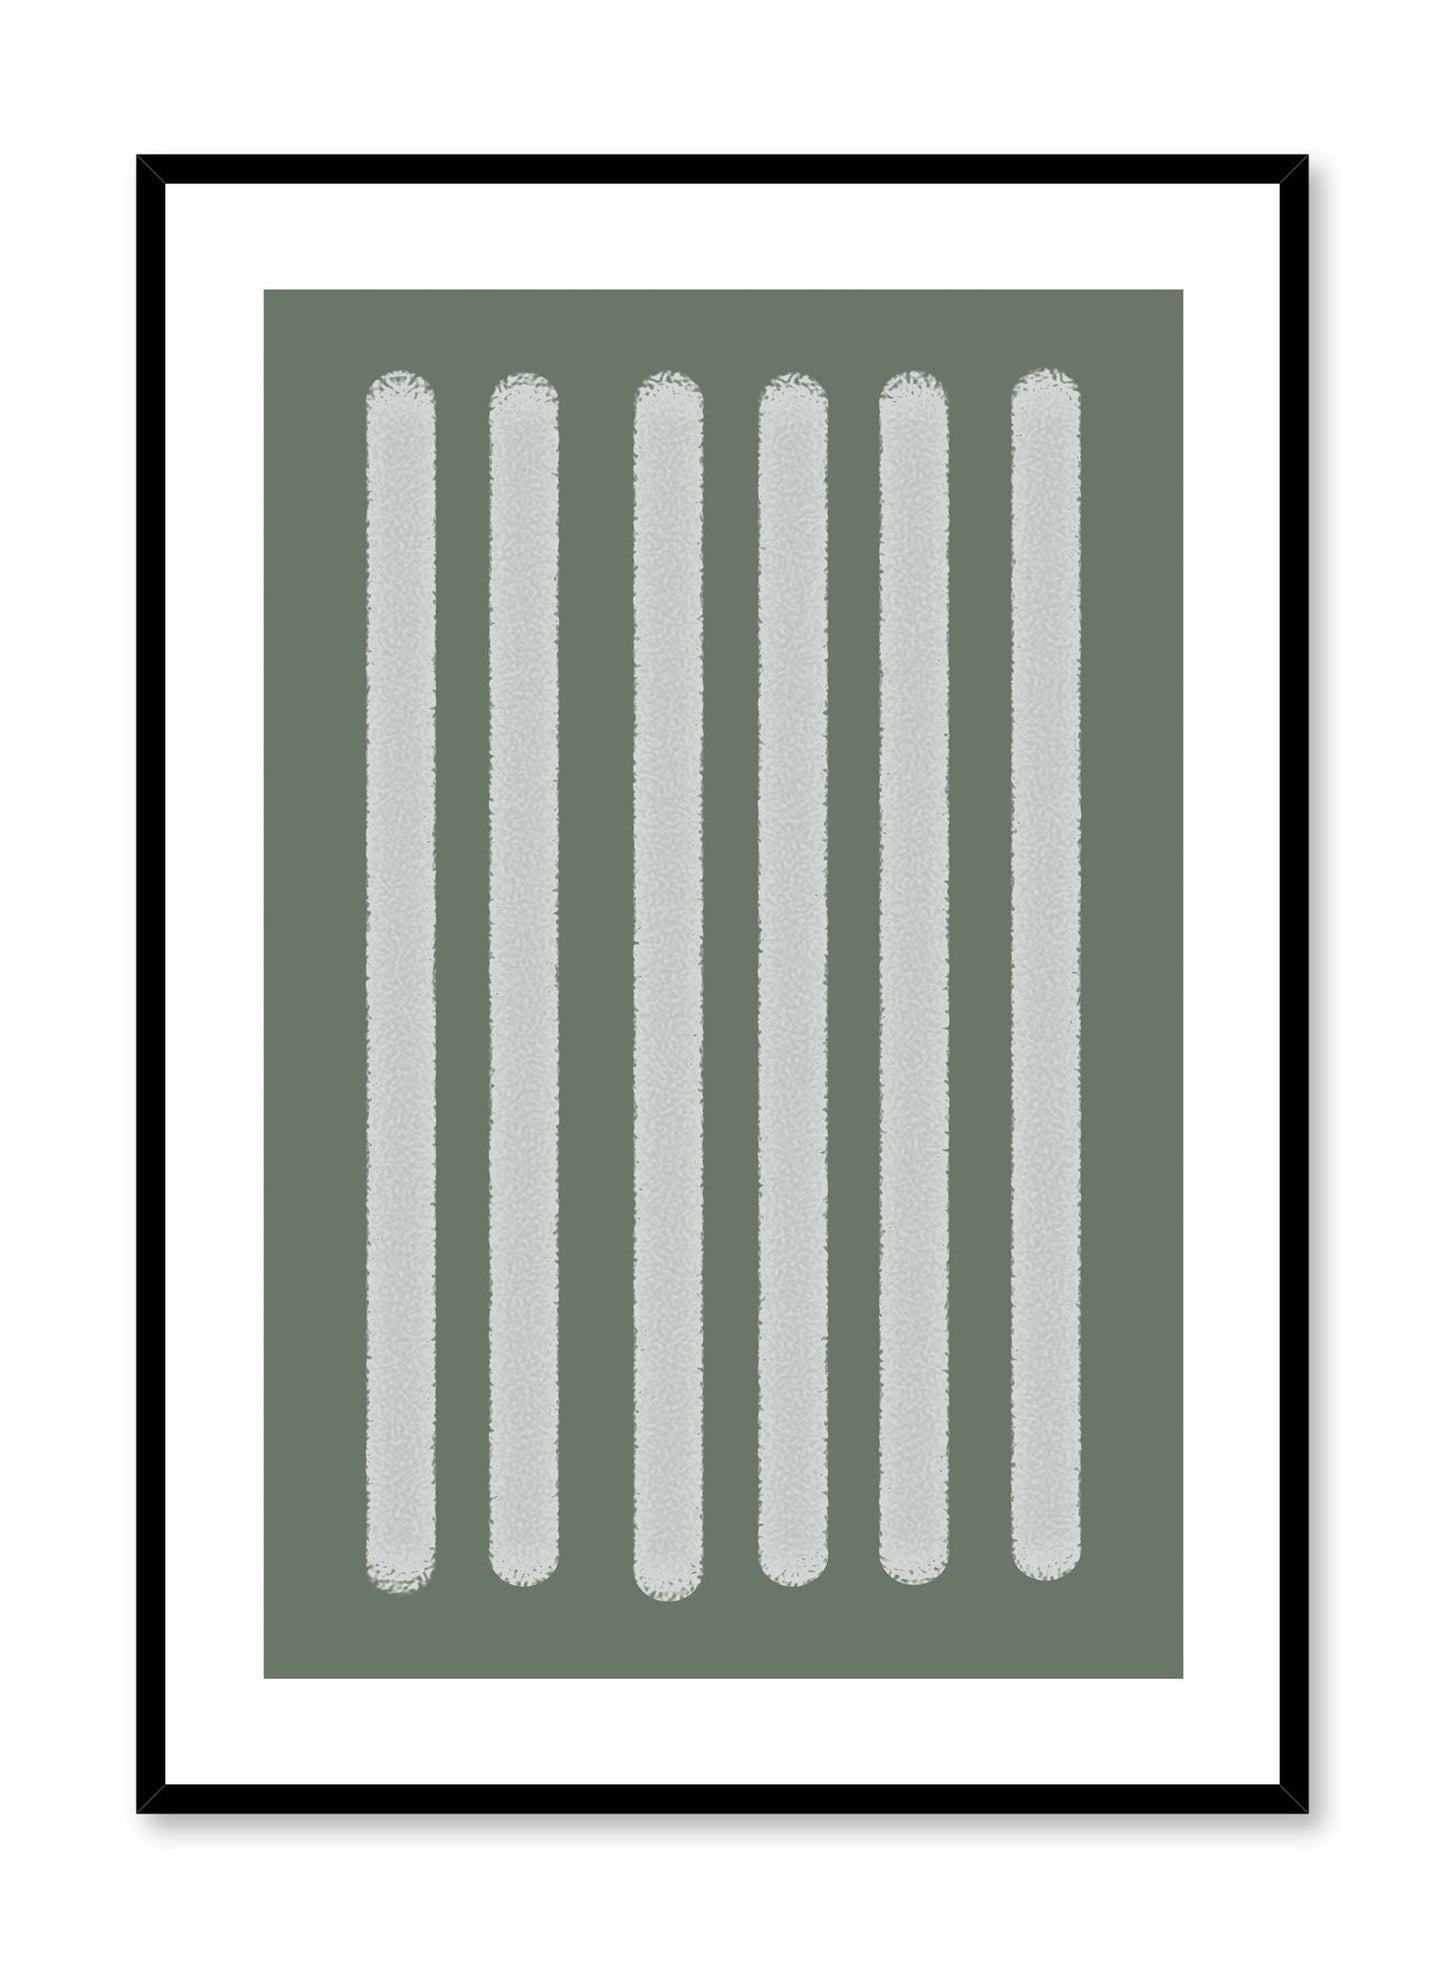 Minimalist design poster by Opposite Wall with abstract green rectangle shapes